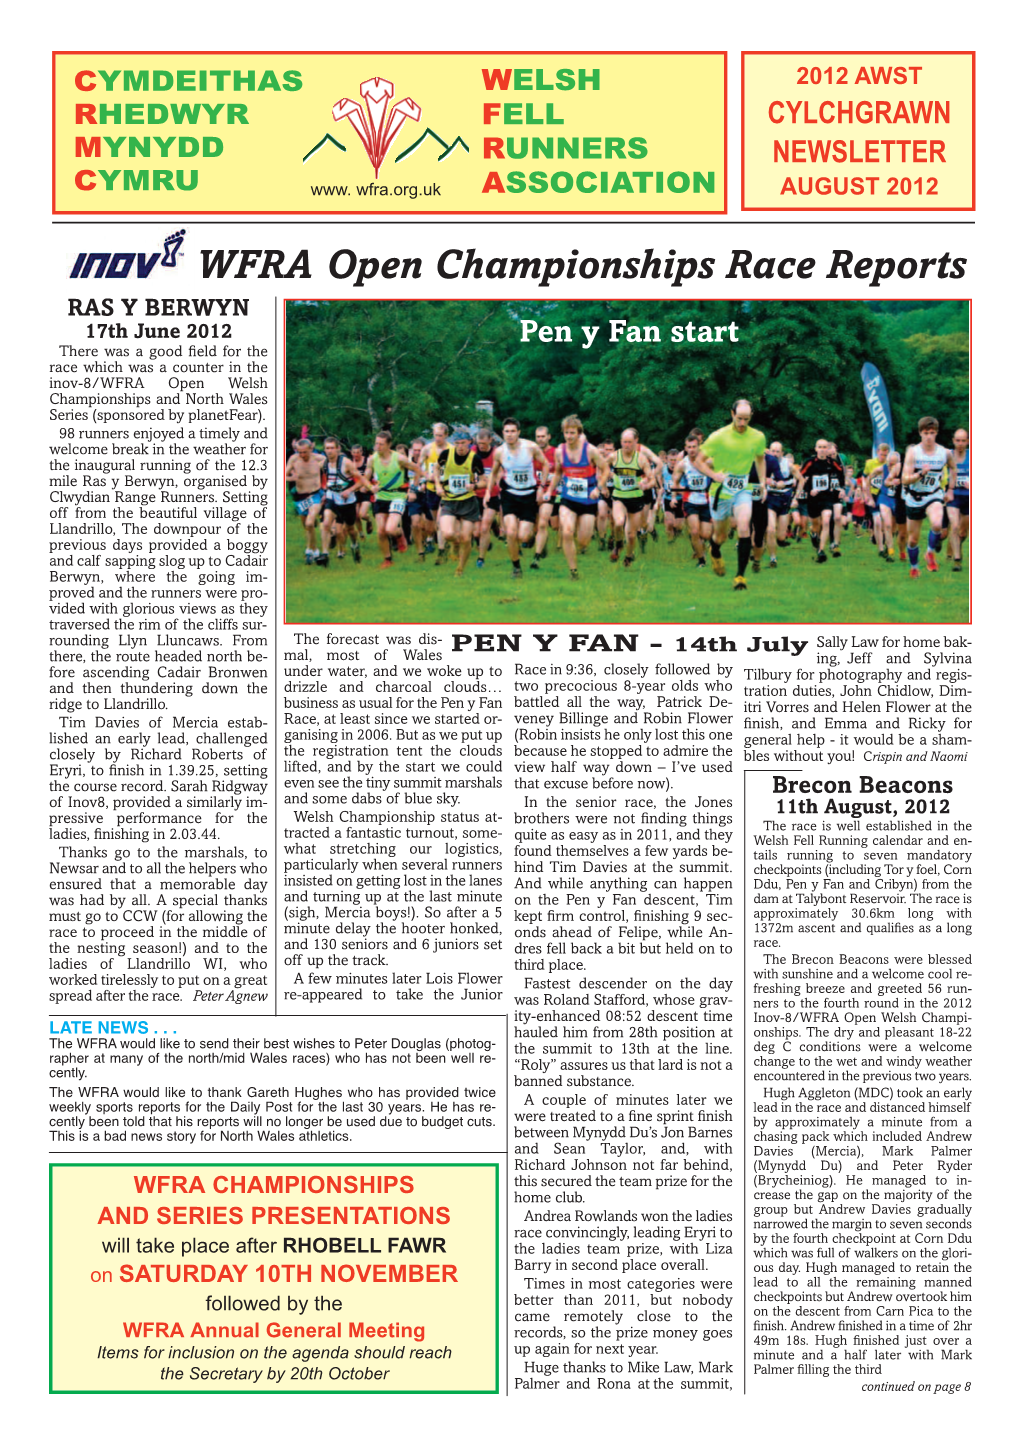 WFRA Open Championships Race Reports